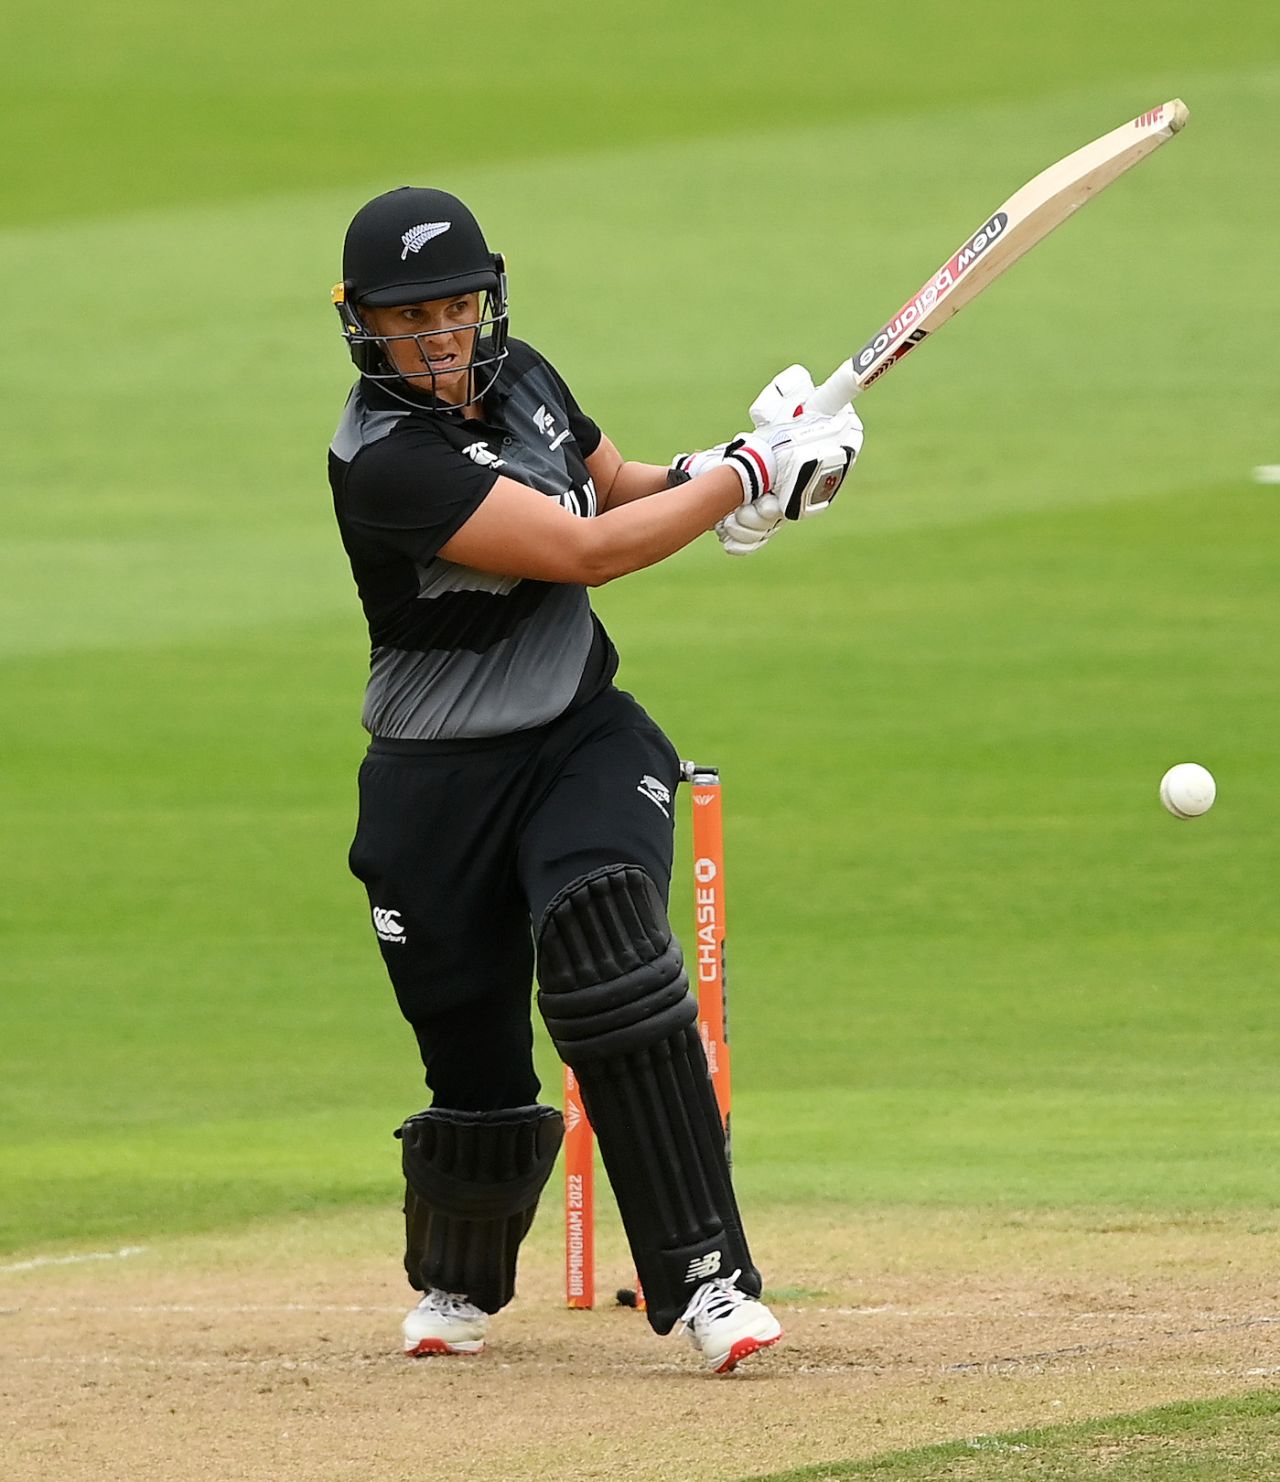 Suzie Bates started slowly, but soon upper her scoring rate, New Zealand vs South Africa, Commonwealth Games, Birmingham, July 30, 2022